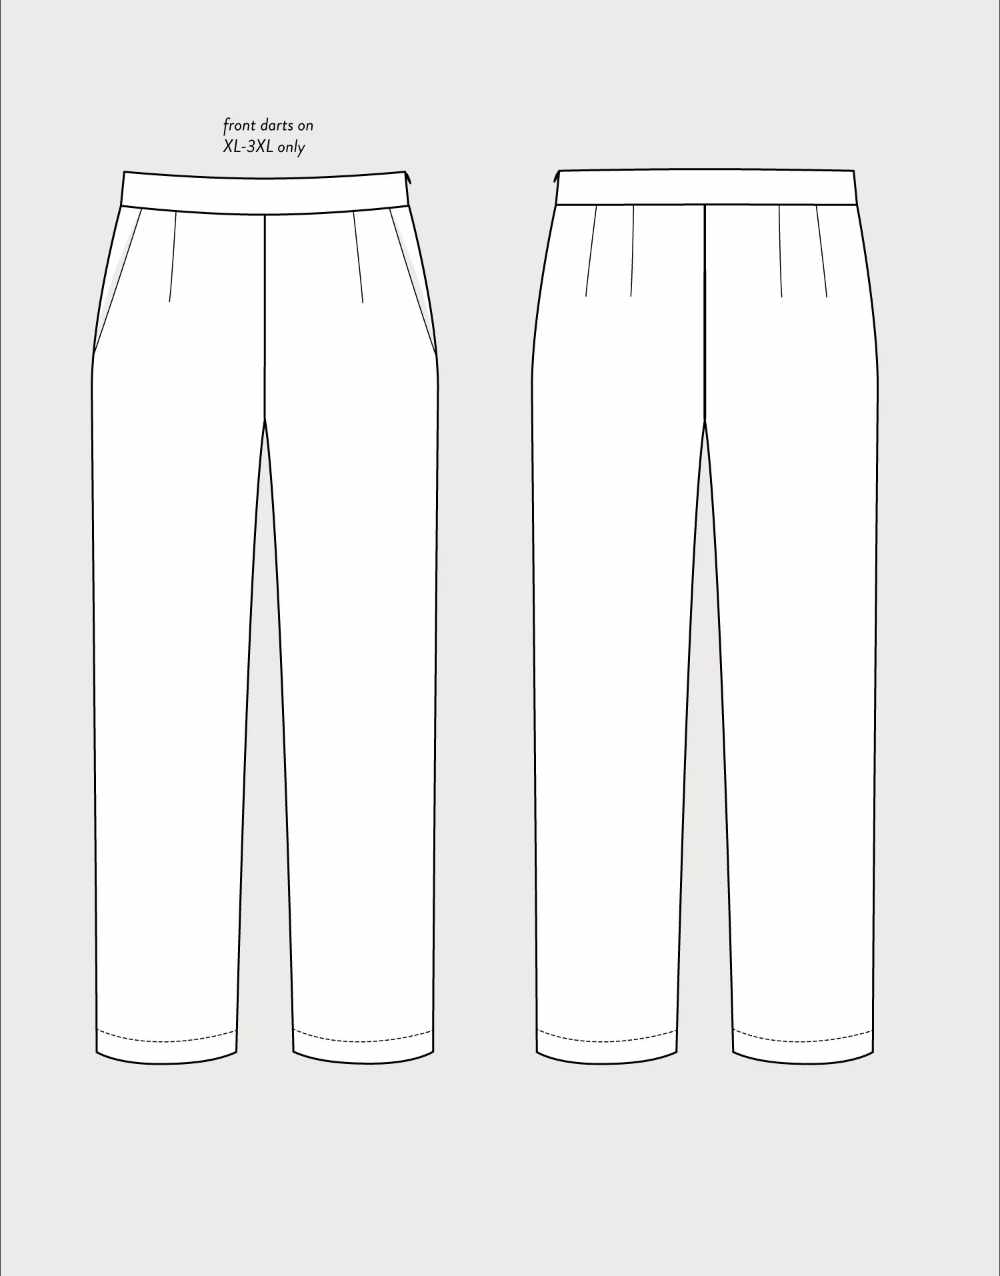 Regular Fit Trousers Sewing Pattern, The Assembly Line – Clothkits